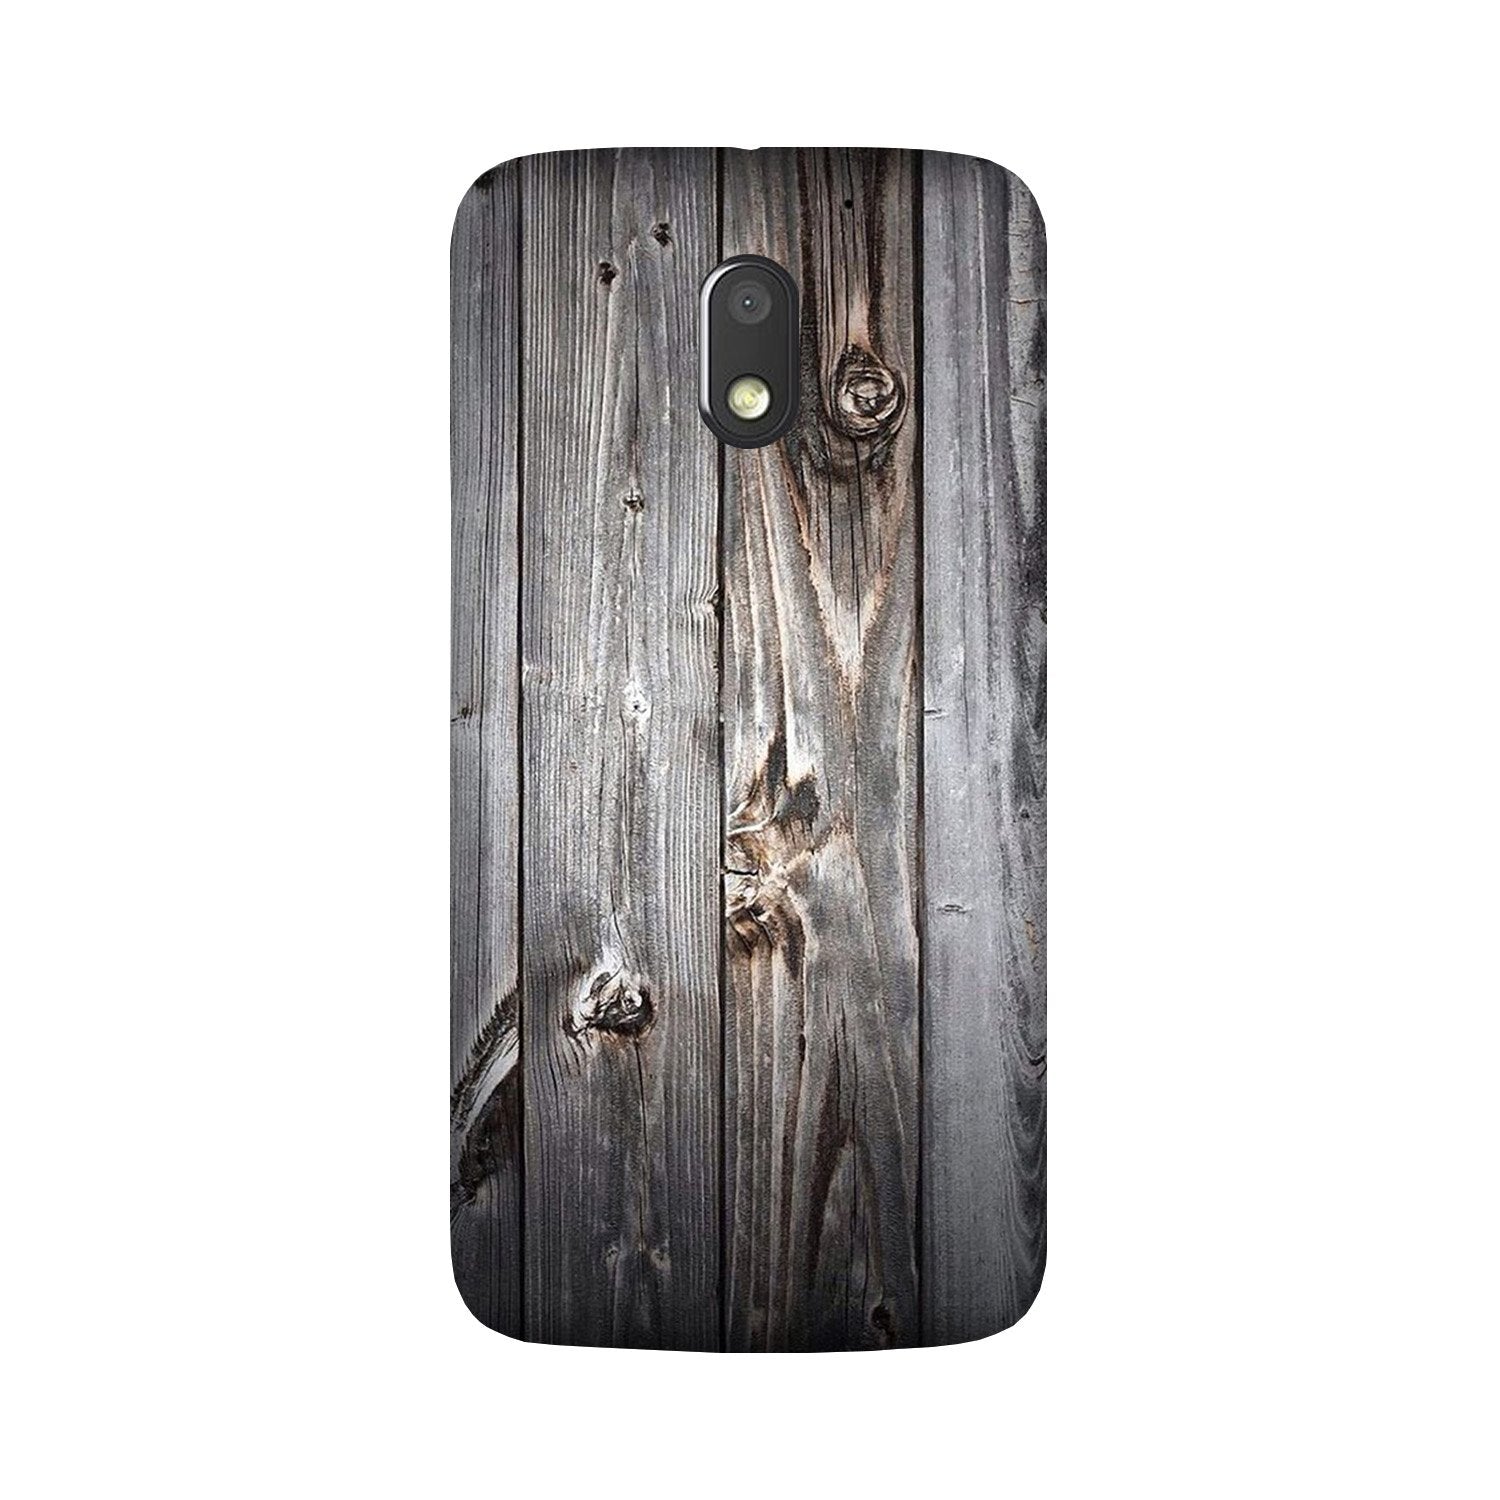 Wooden Look Case for Moto G4 Play(Design - 114)